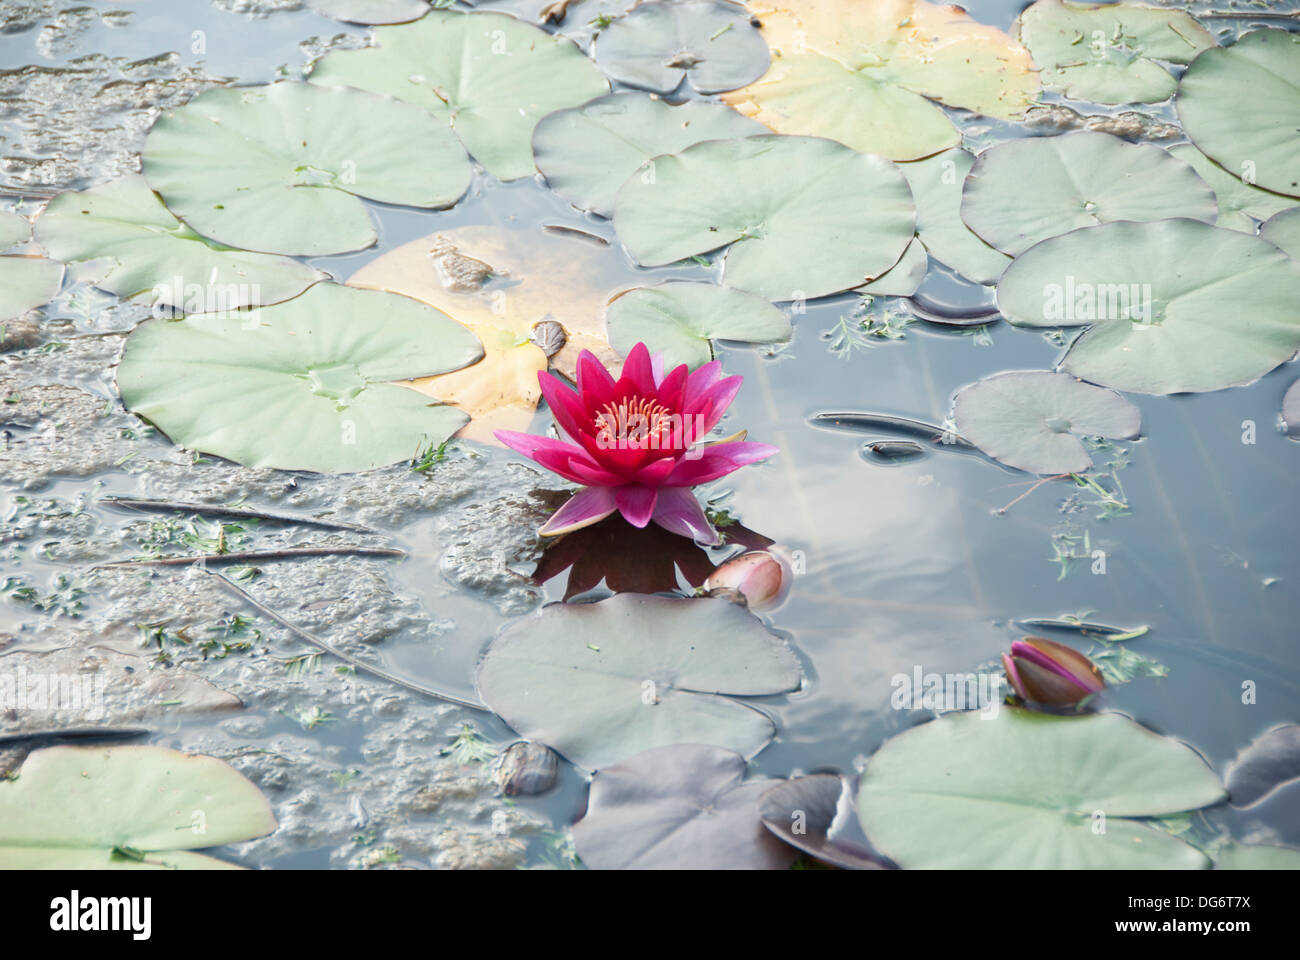 Red water lily flowers Stock Photo